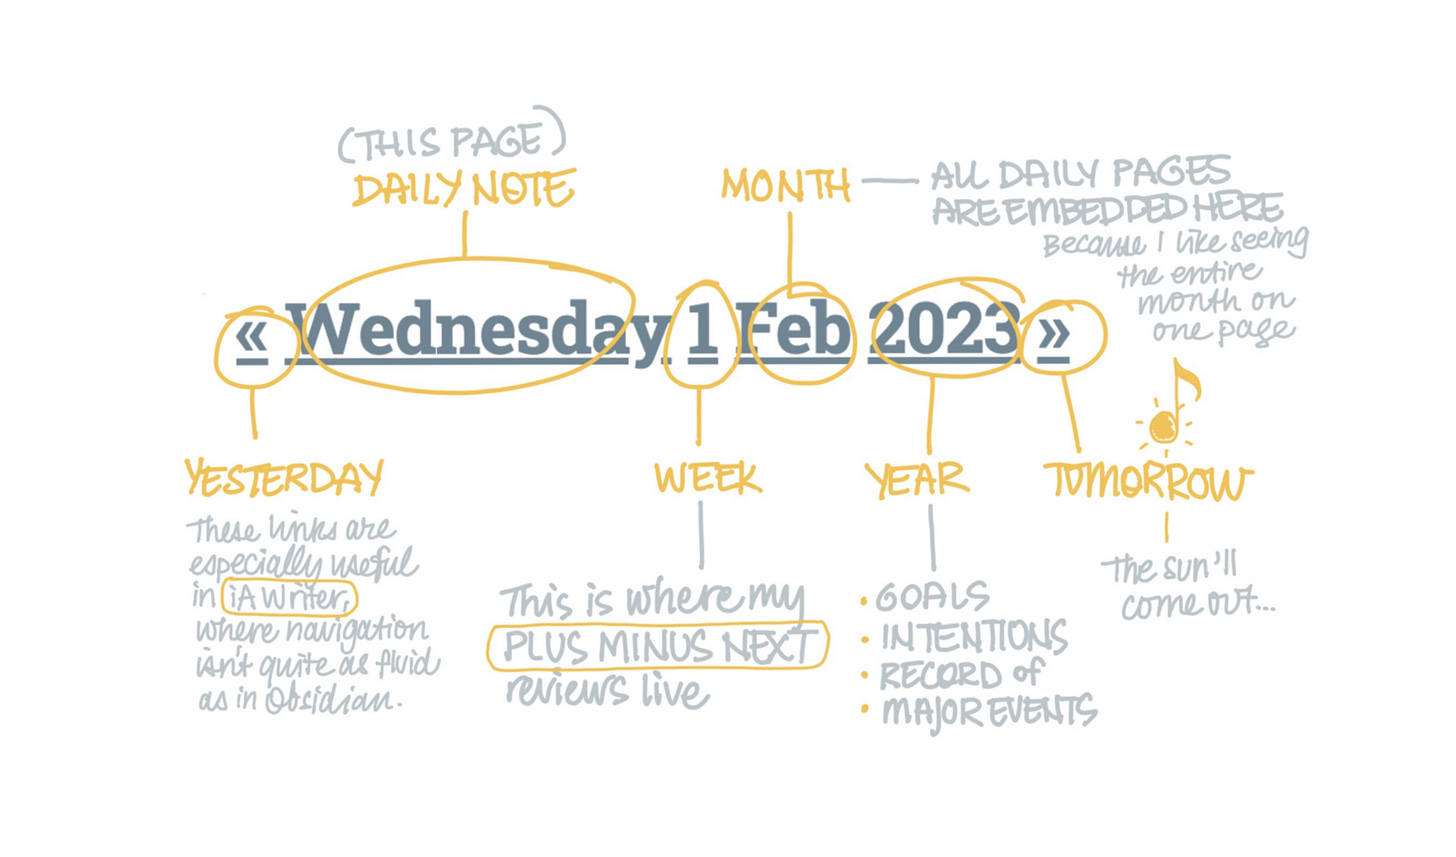 A typewritten date sits in the center of the screen (“« Wednesday 1 Feb 2023 »”) surrounded by handwritten text. The guillemets = Yesterday, Tomorrow. These lines are especially useful in iA Writer, where navigation isn’t quite as fluid as in Obsidian. Wednesday = “Daily Note”. The number 1 = “Week”. Feb = “Month”. All daily pages are embedded here because I like seeing the entire month on one page. 2023 = “Year”: Goals, Intentions, Record of major events.